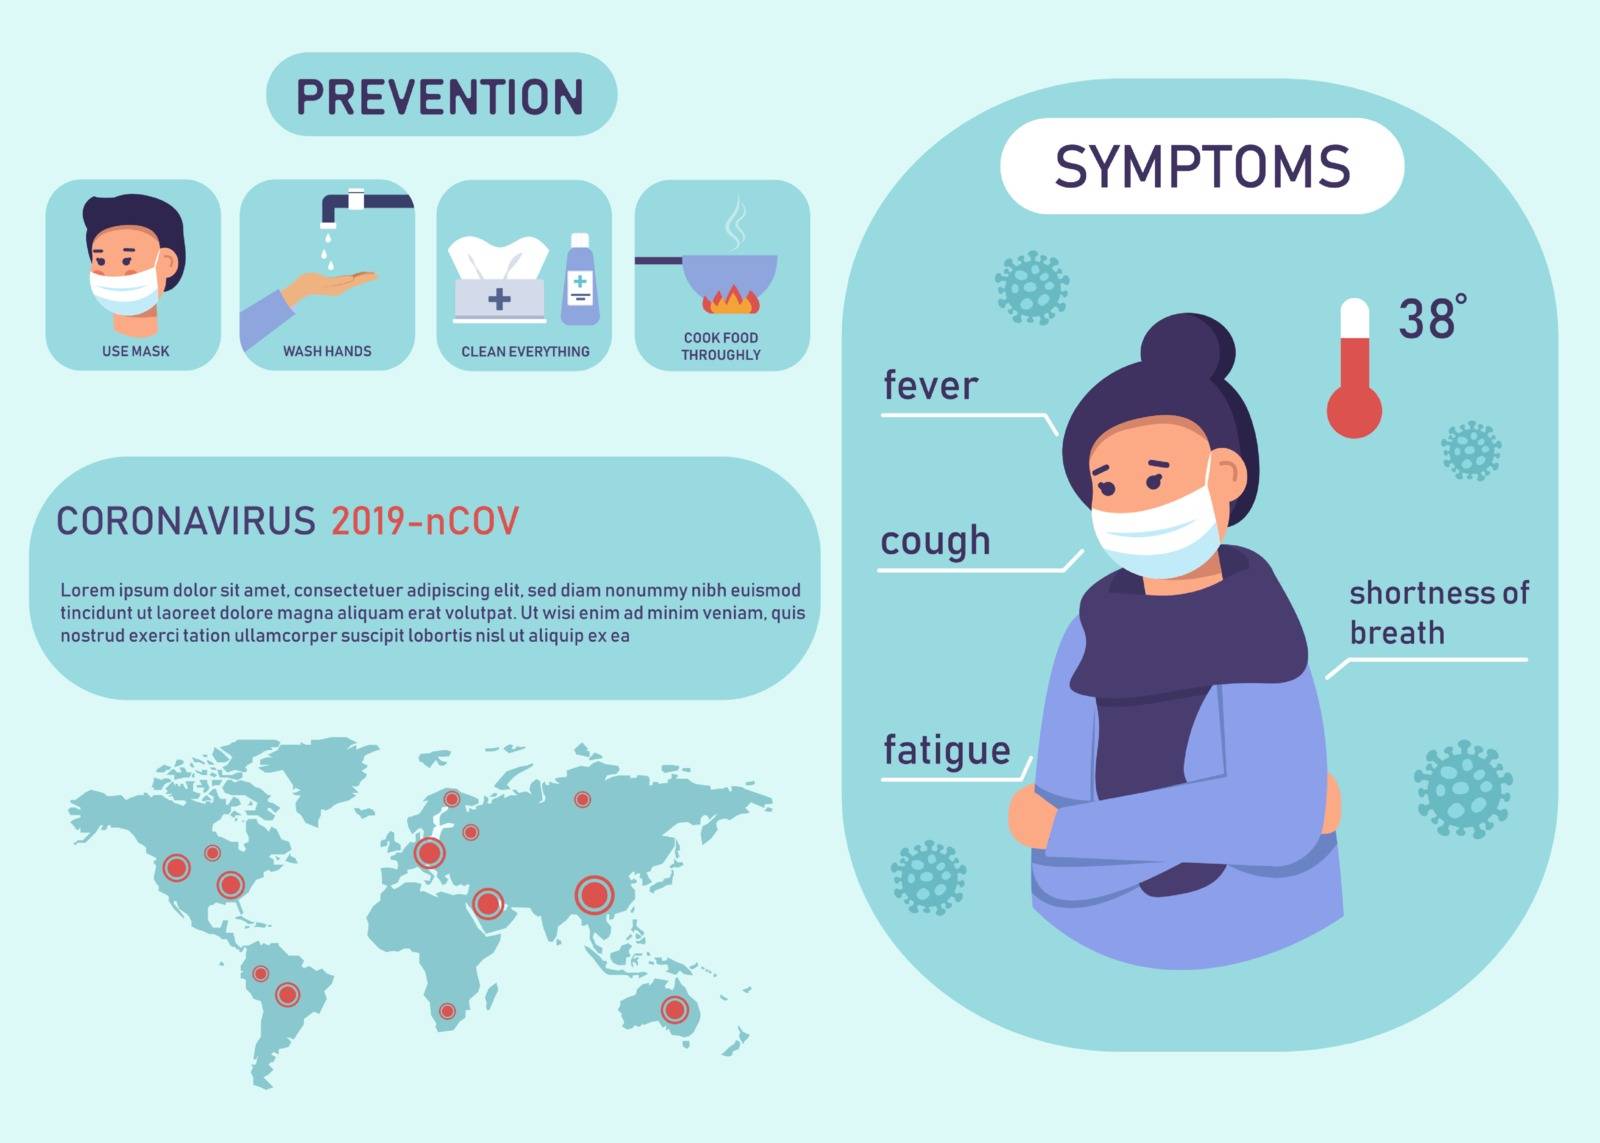 Corona virus 2019 symptoms and prevention infographic. 2019-nCOV cases around the world. Vector Illustration.